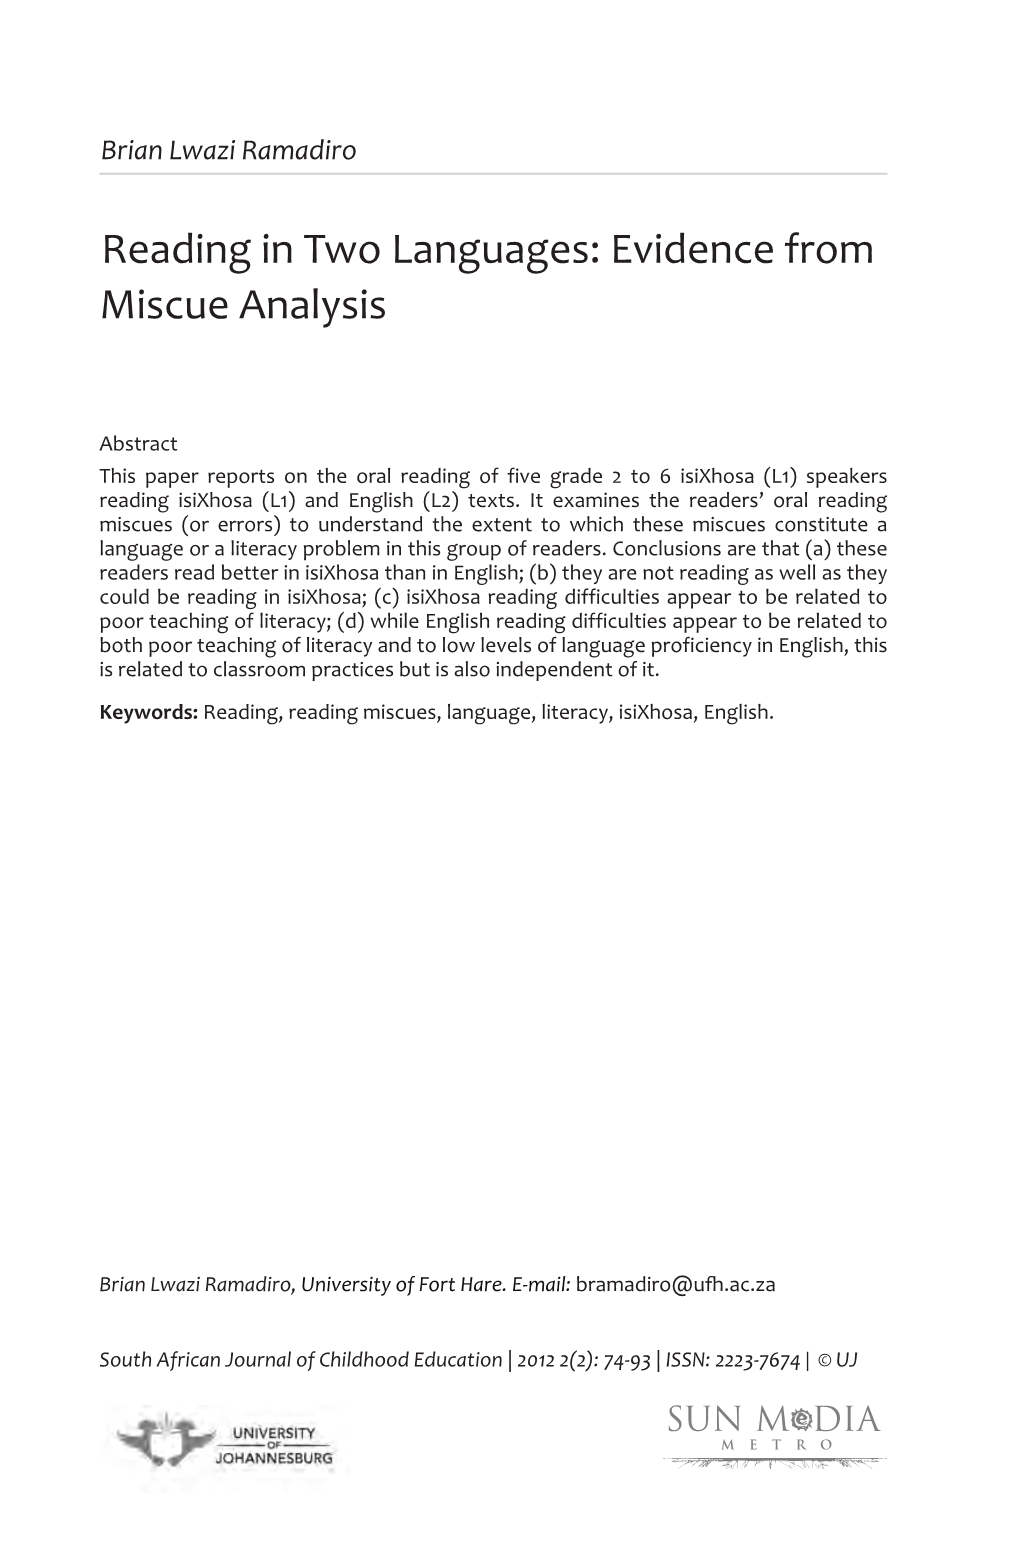 Reading in Two Languages: Evidence from Miscue Analysis